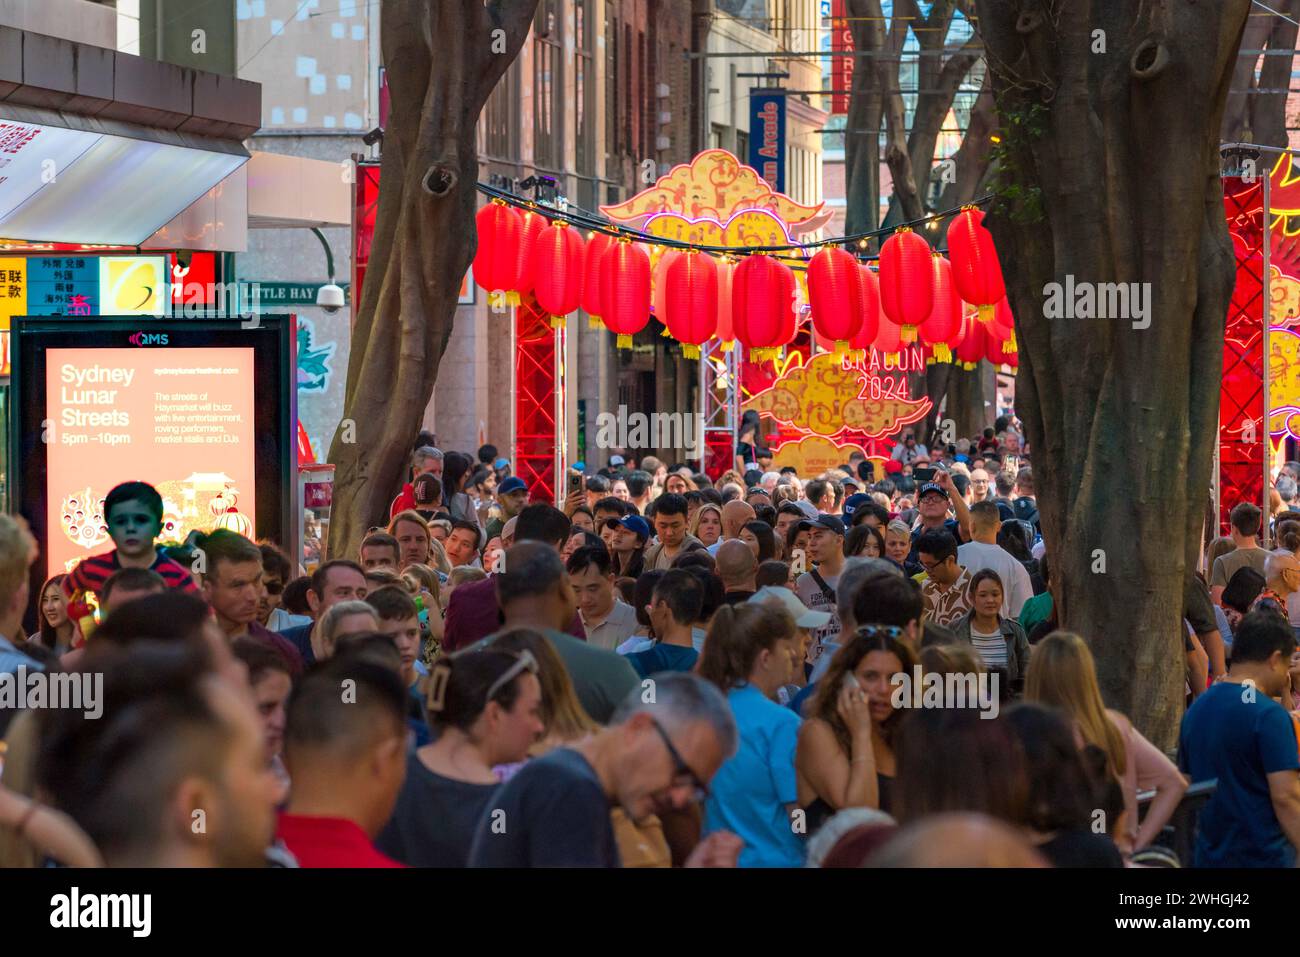 Sydney Australia 10 Feb 2024: Lunar New Year kicked off in earnest today with big crowds of people flocking to Sydney’s China Town to eat and celebrate. Food from many different nations was available from restaurants and specially set up stalls to keep everyone fed and happy. Many visitors chose to walk through Dixon Street, the traditional hub of China Town in Sydney. Credit: Stephen Dwyer / Alamy Live News Stock Photo